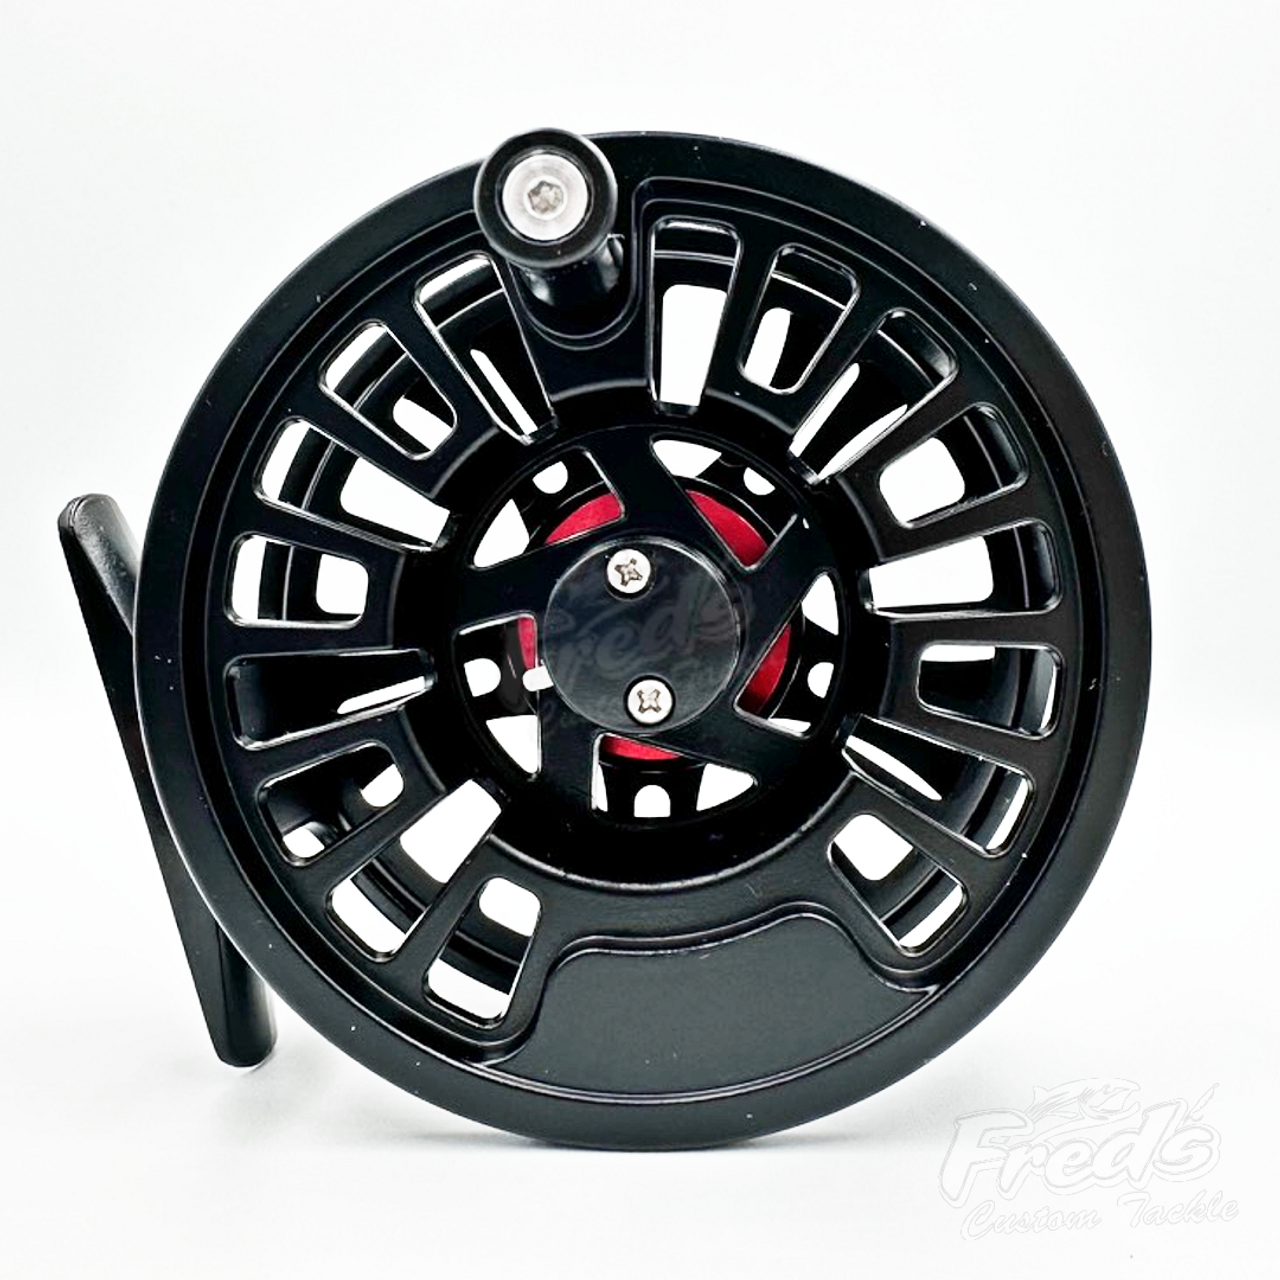 DRAGONFLY VENTURE 3 FLY REEL - FRED'S CUSTOM TACKLE